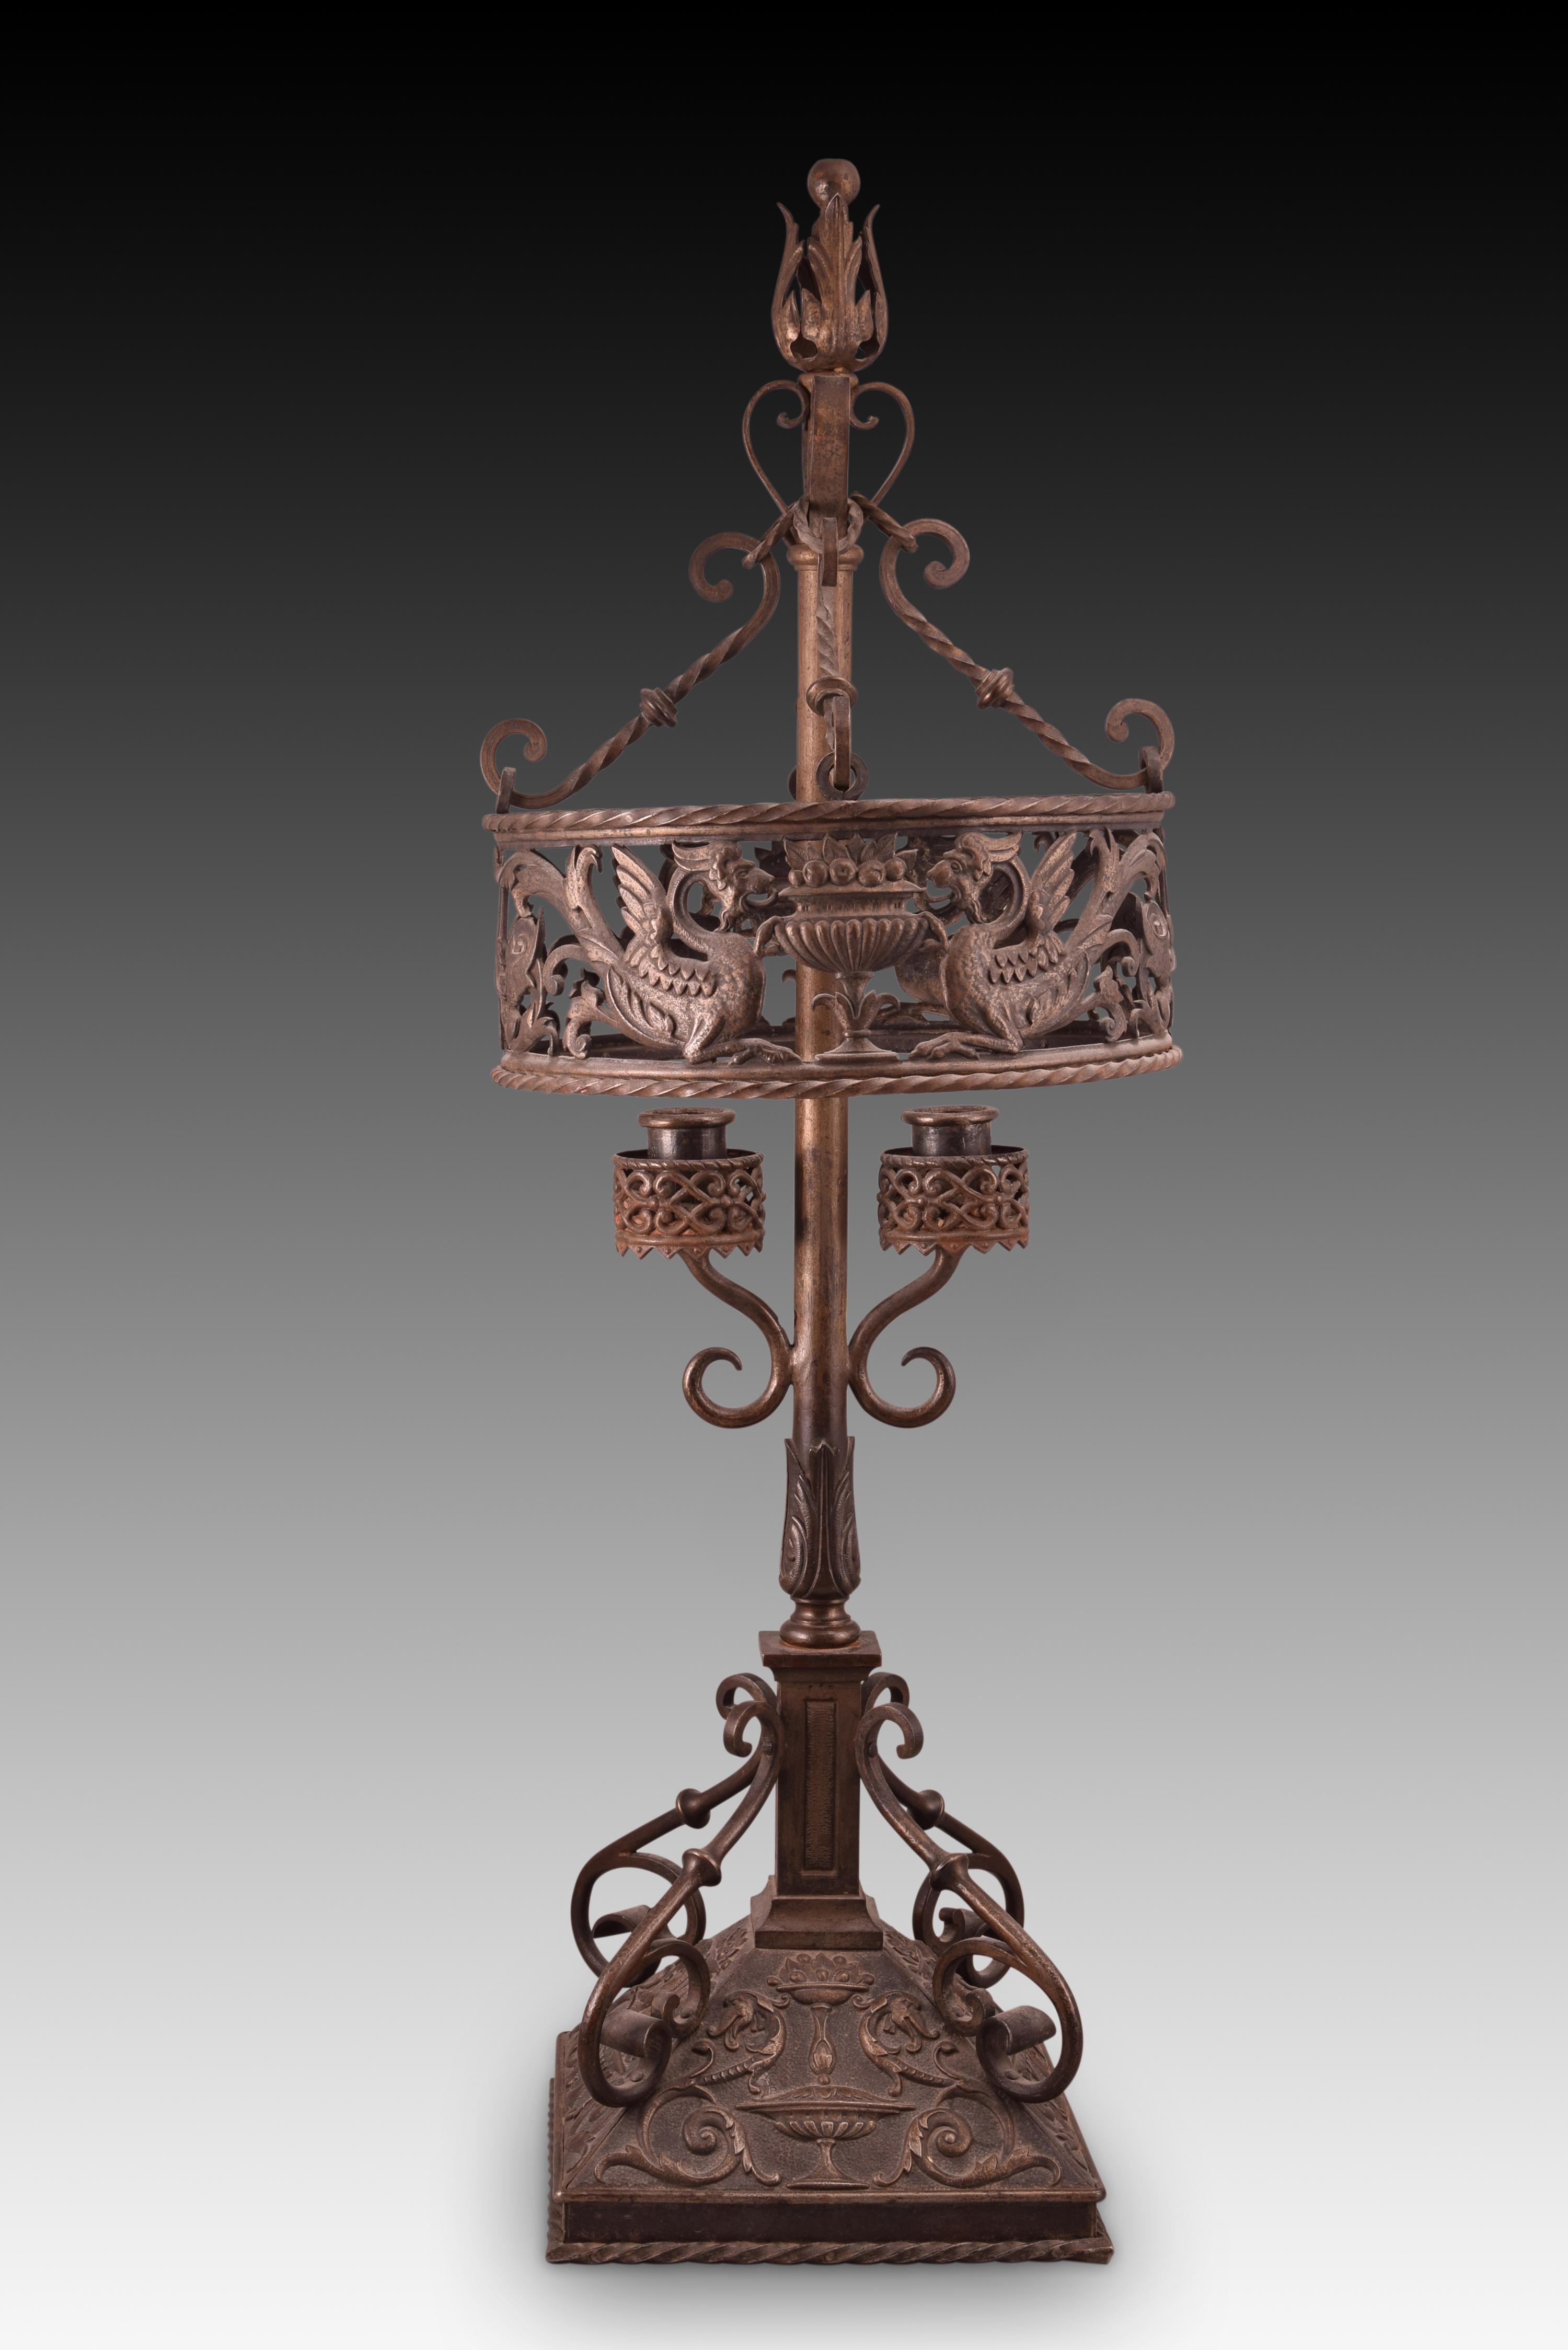 Neoplateresque lamp or candlestick. Wrought and embossed iron. Spain, towards the end of the 19th century. 
Two-light table chandelier made of wrought and embossed iron that has a square base, a balustraded axis with an architectural base and a